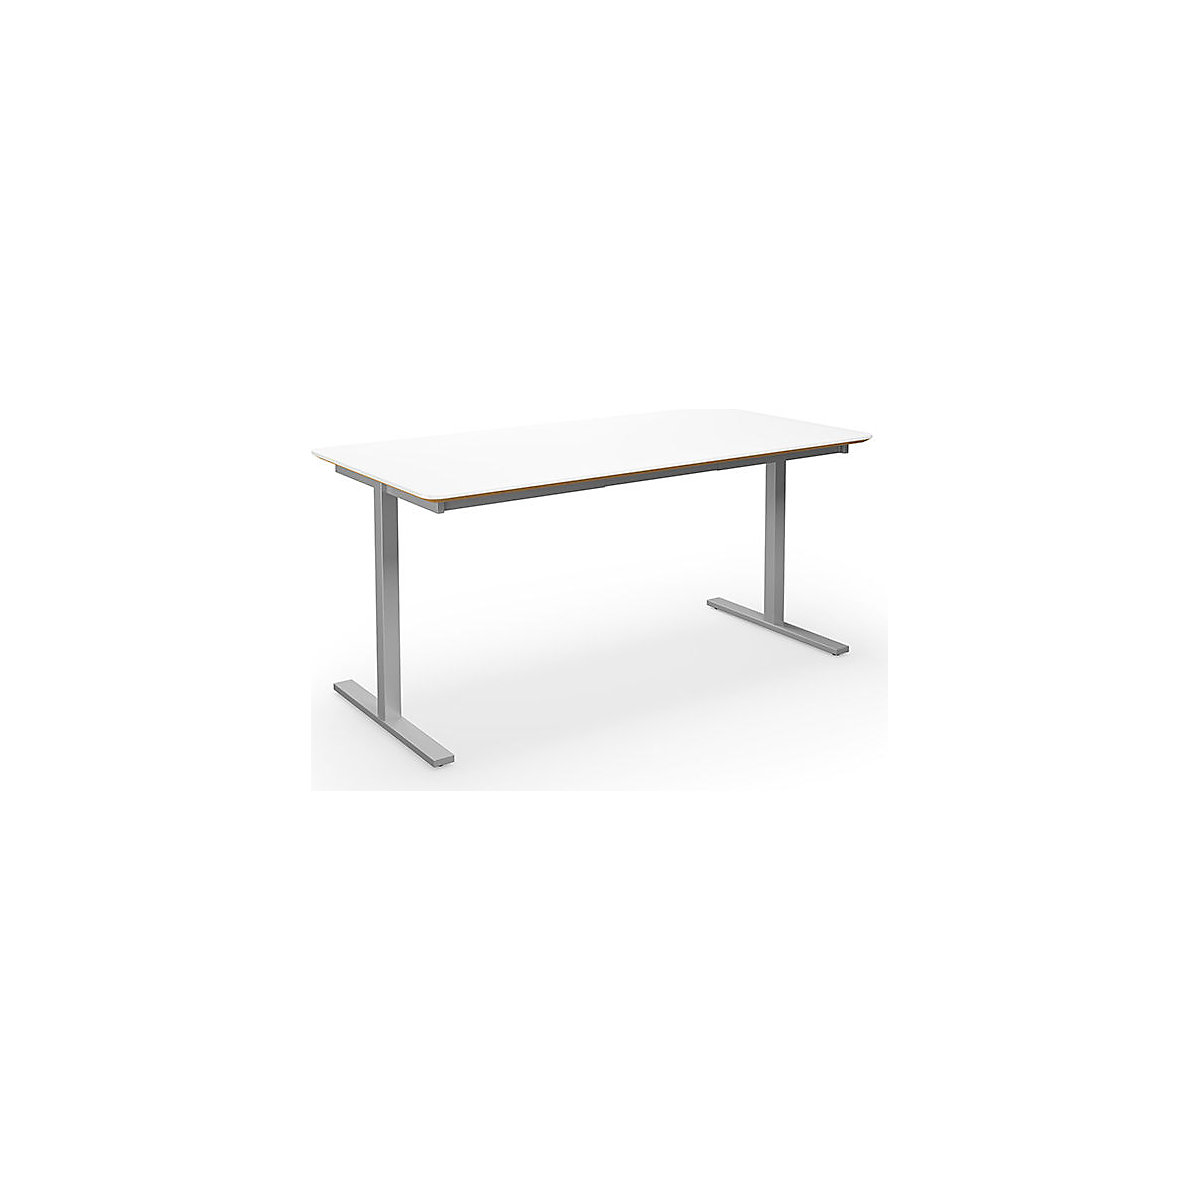 DUO-T Trend multi-purpose desk, straight tabletop, rounded corners, WxD 1400 x 800 mm, white, silver-5